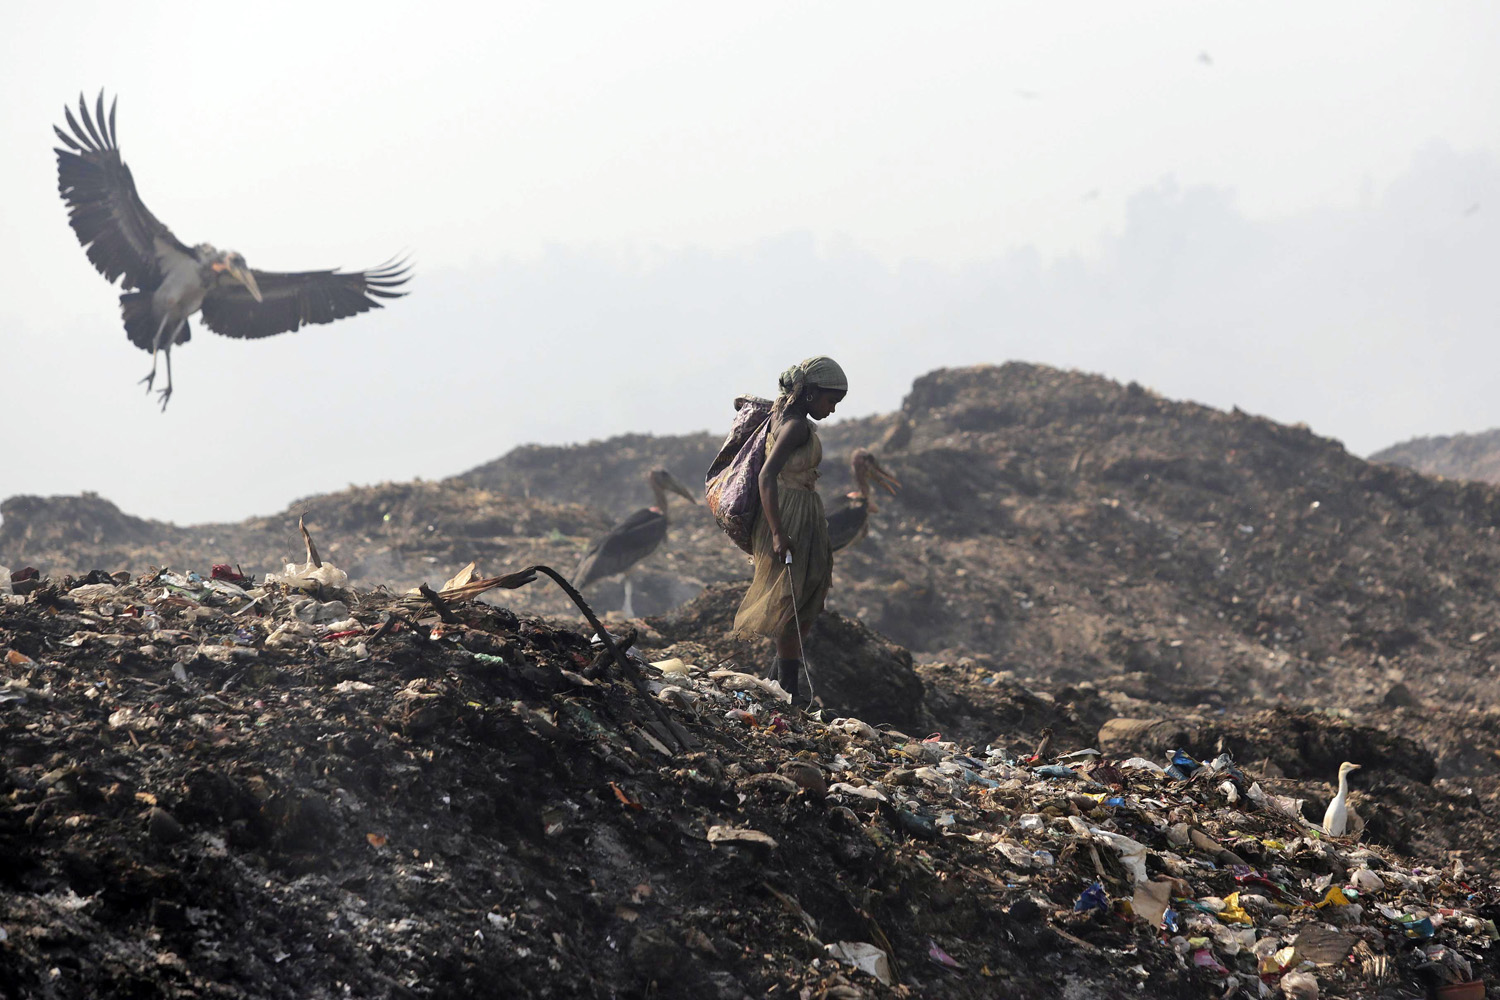 Apr. 22, 2014. A Greater Adjutant Stork flies by a ragpicker looking for recyclable items at a garbage dump on Earth Day, on the outskirts of Gauhati, India.